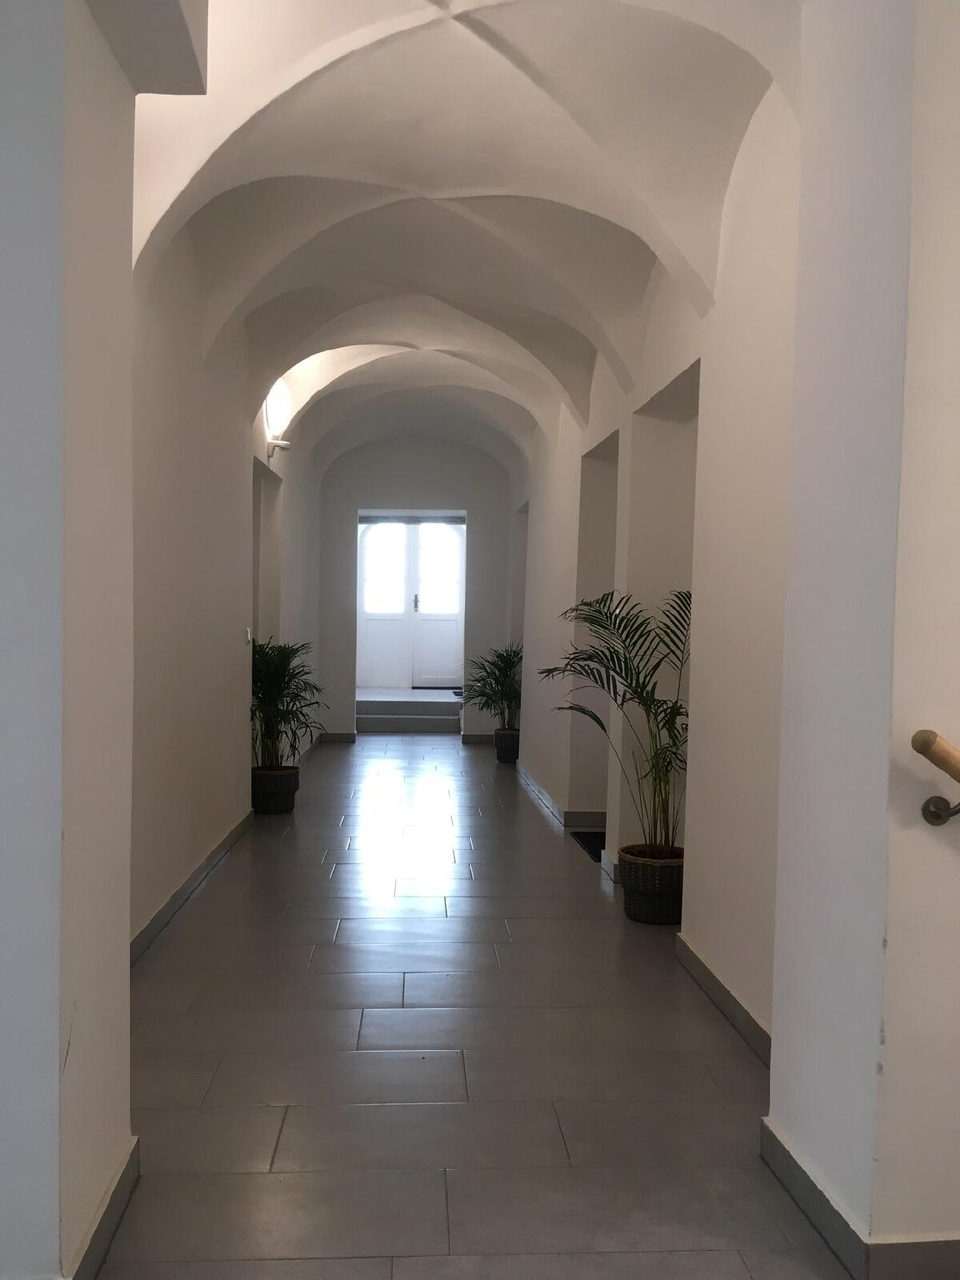 Public Area 3, New flat in old town + garage, Steyr